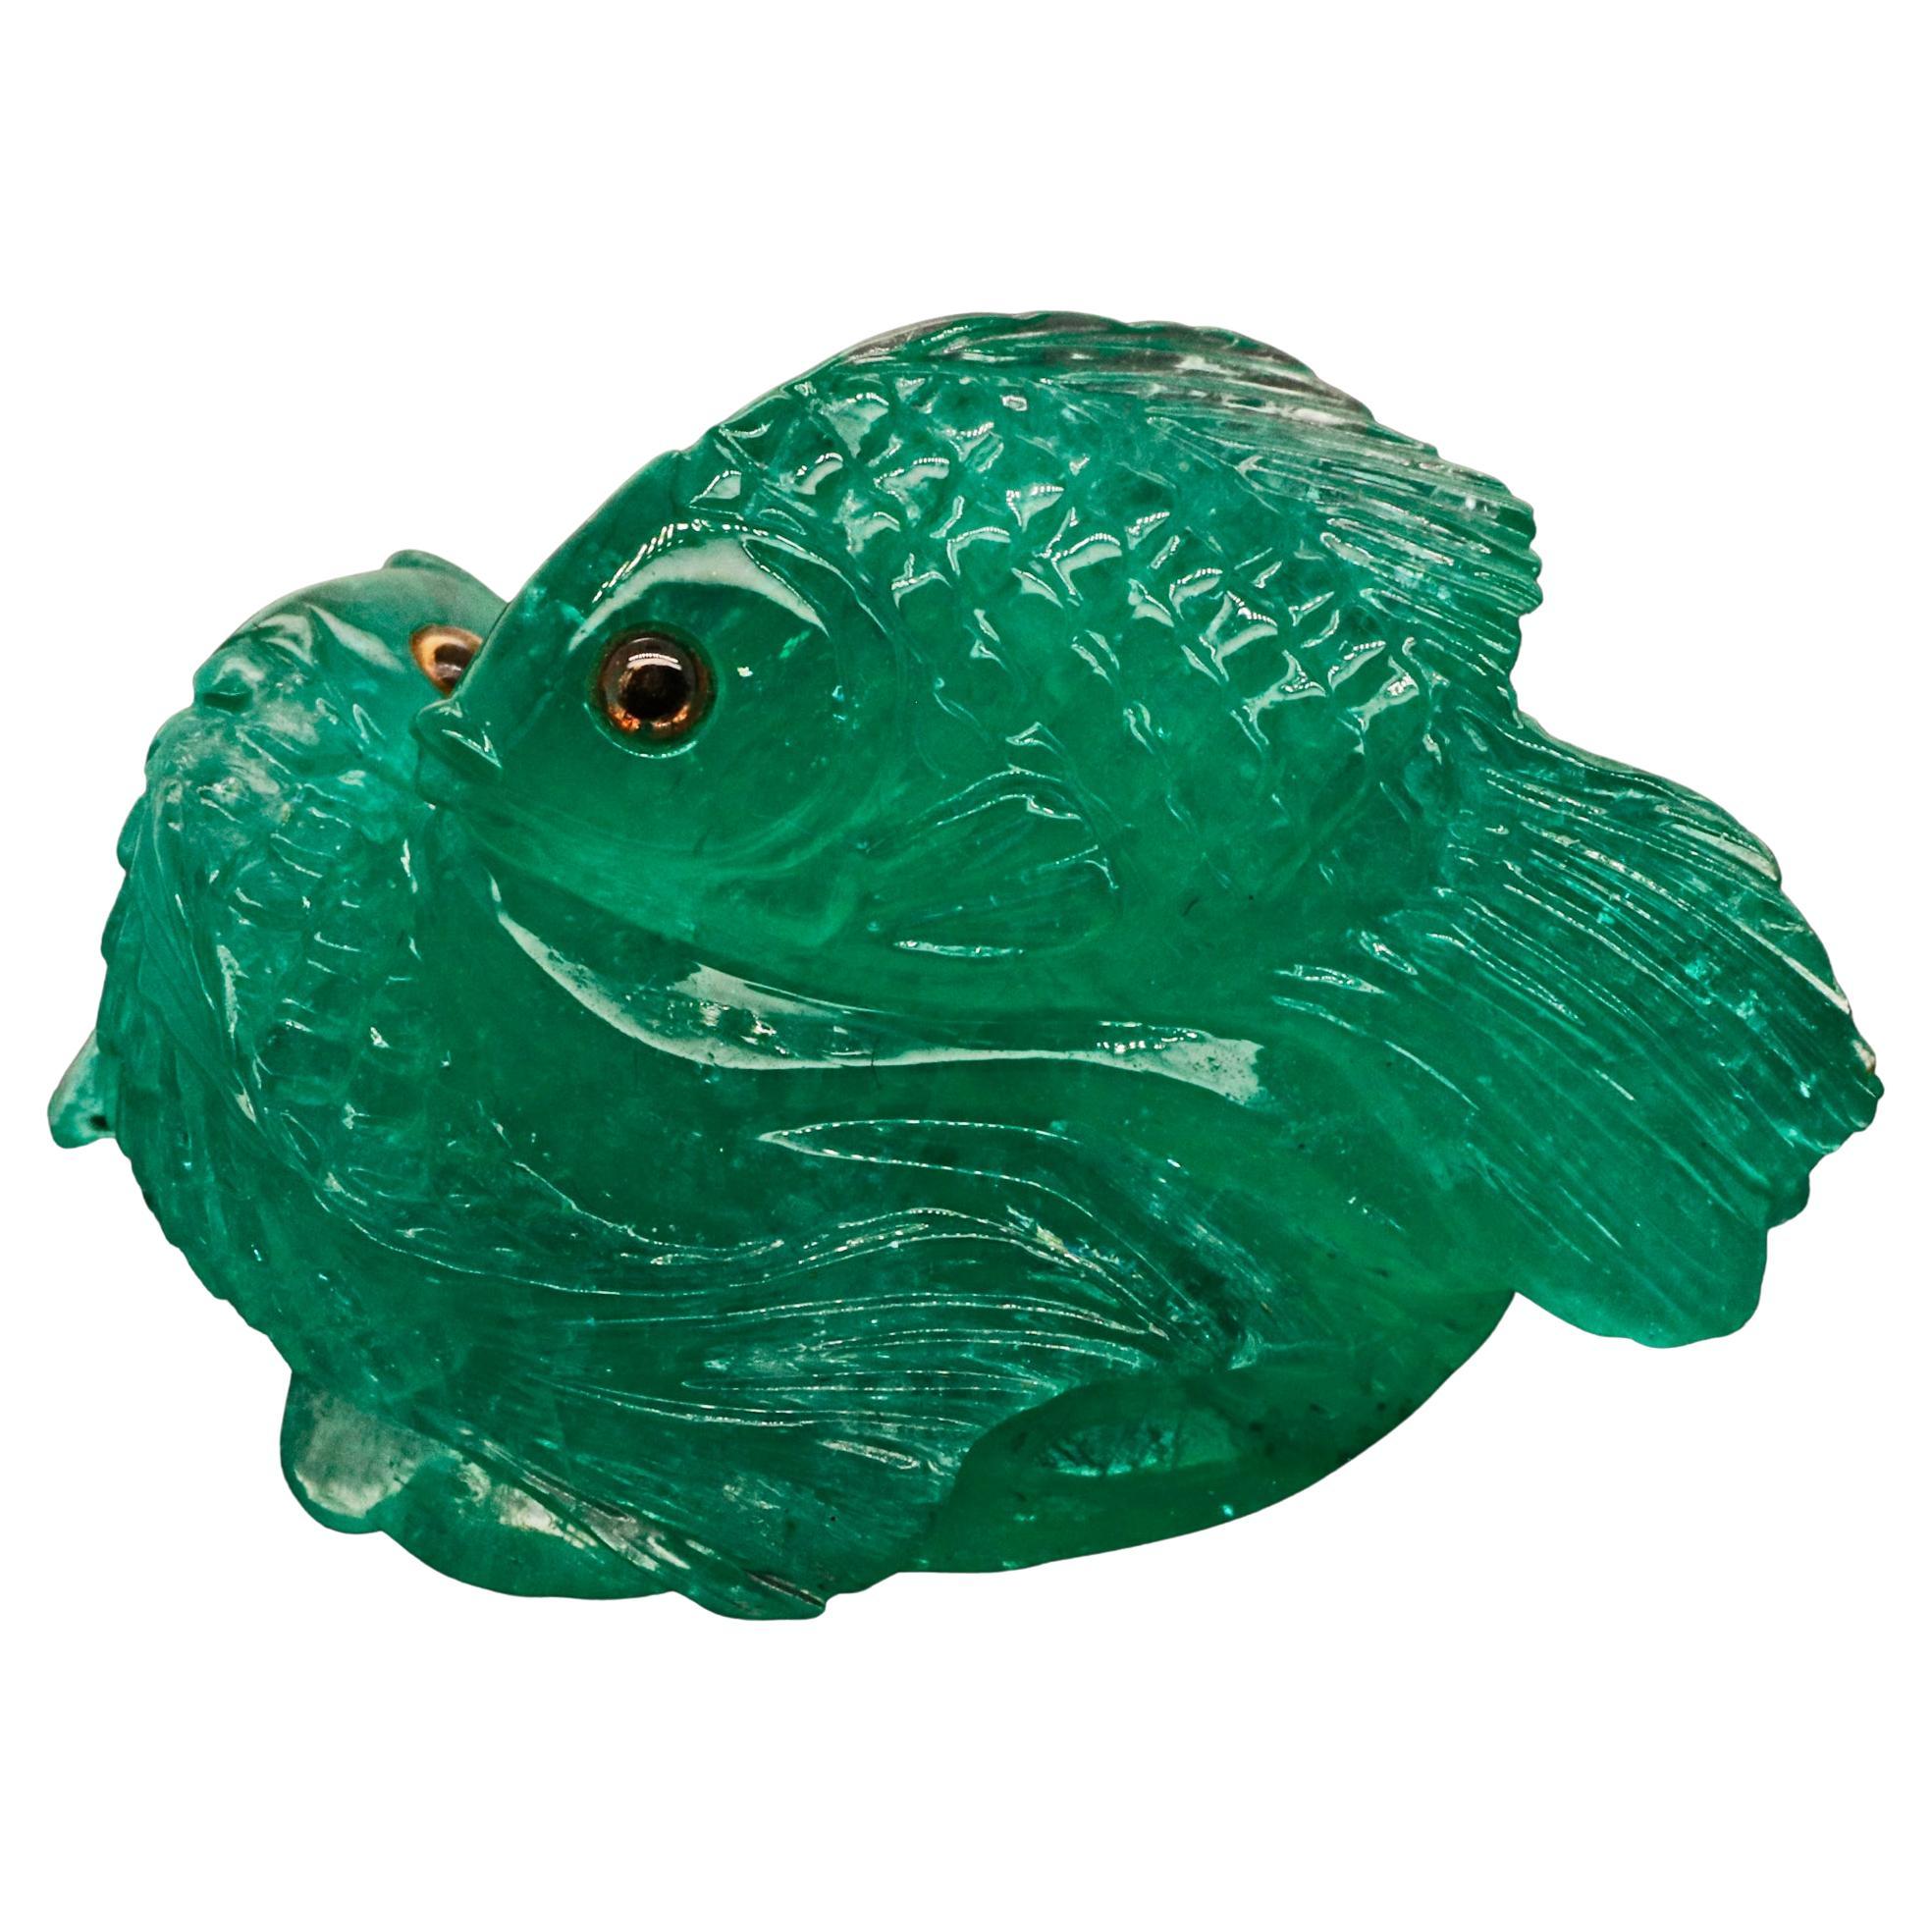 40 Ct Natural Emerald Fish Carving For Sale